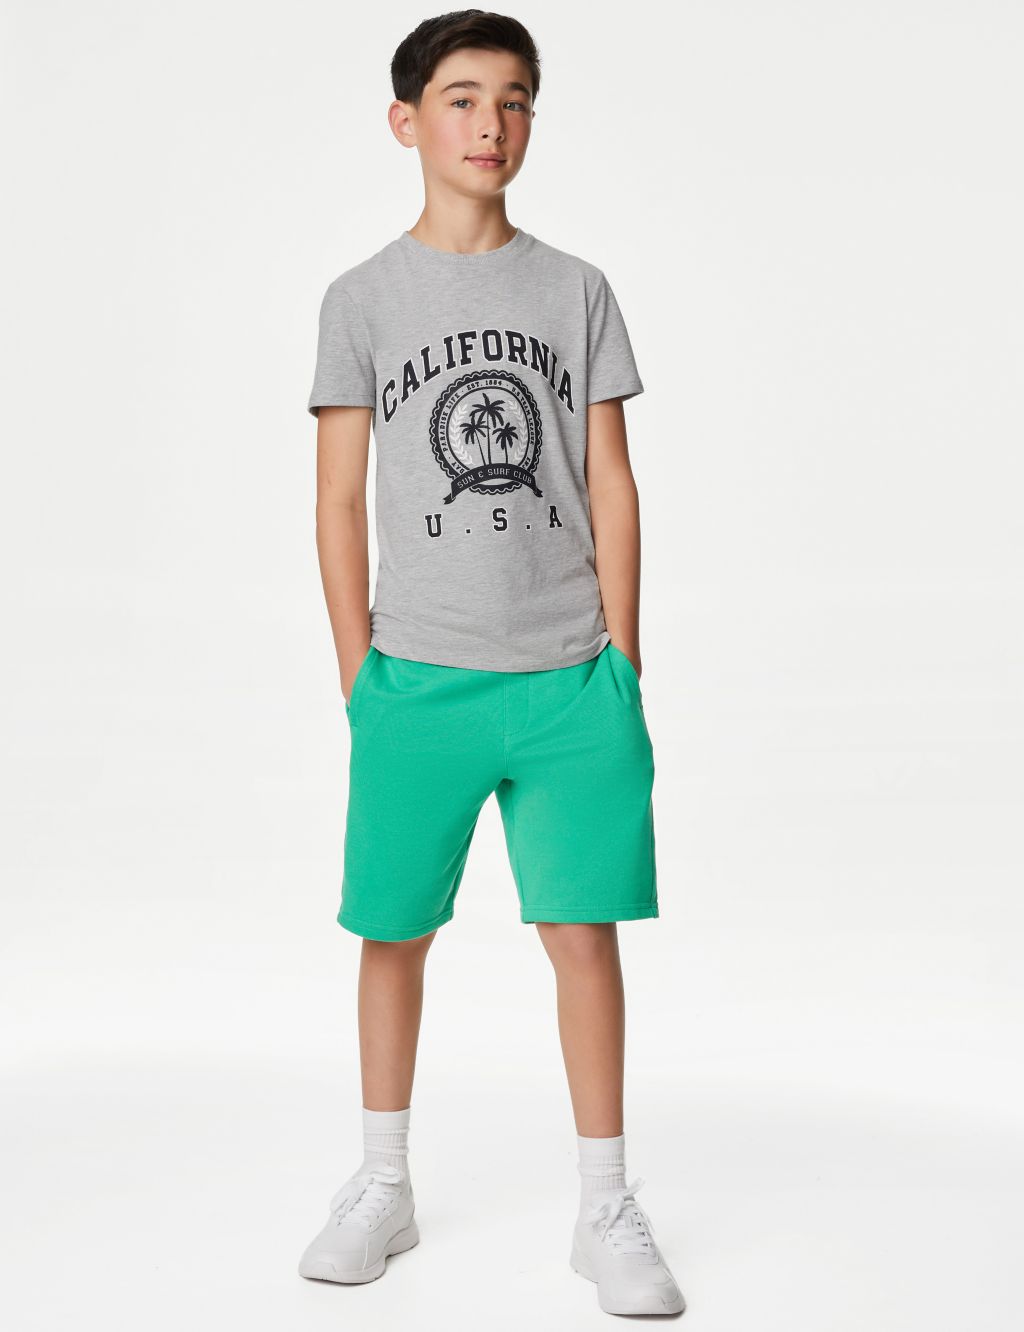 Page 3 - Boys’ Tops | M&S